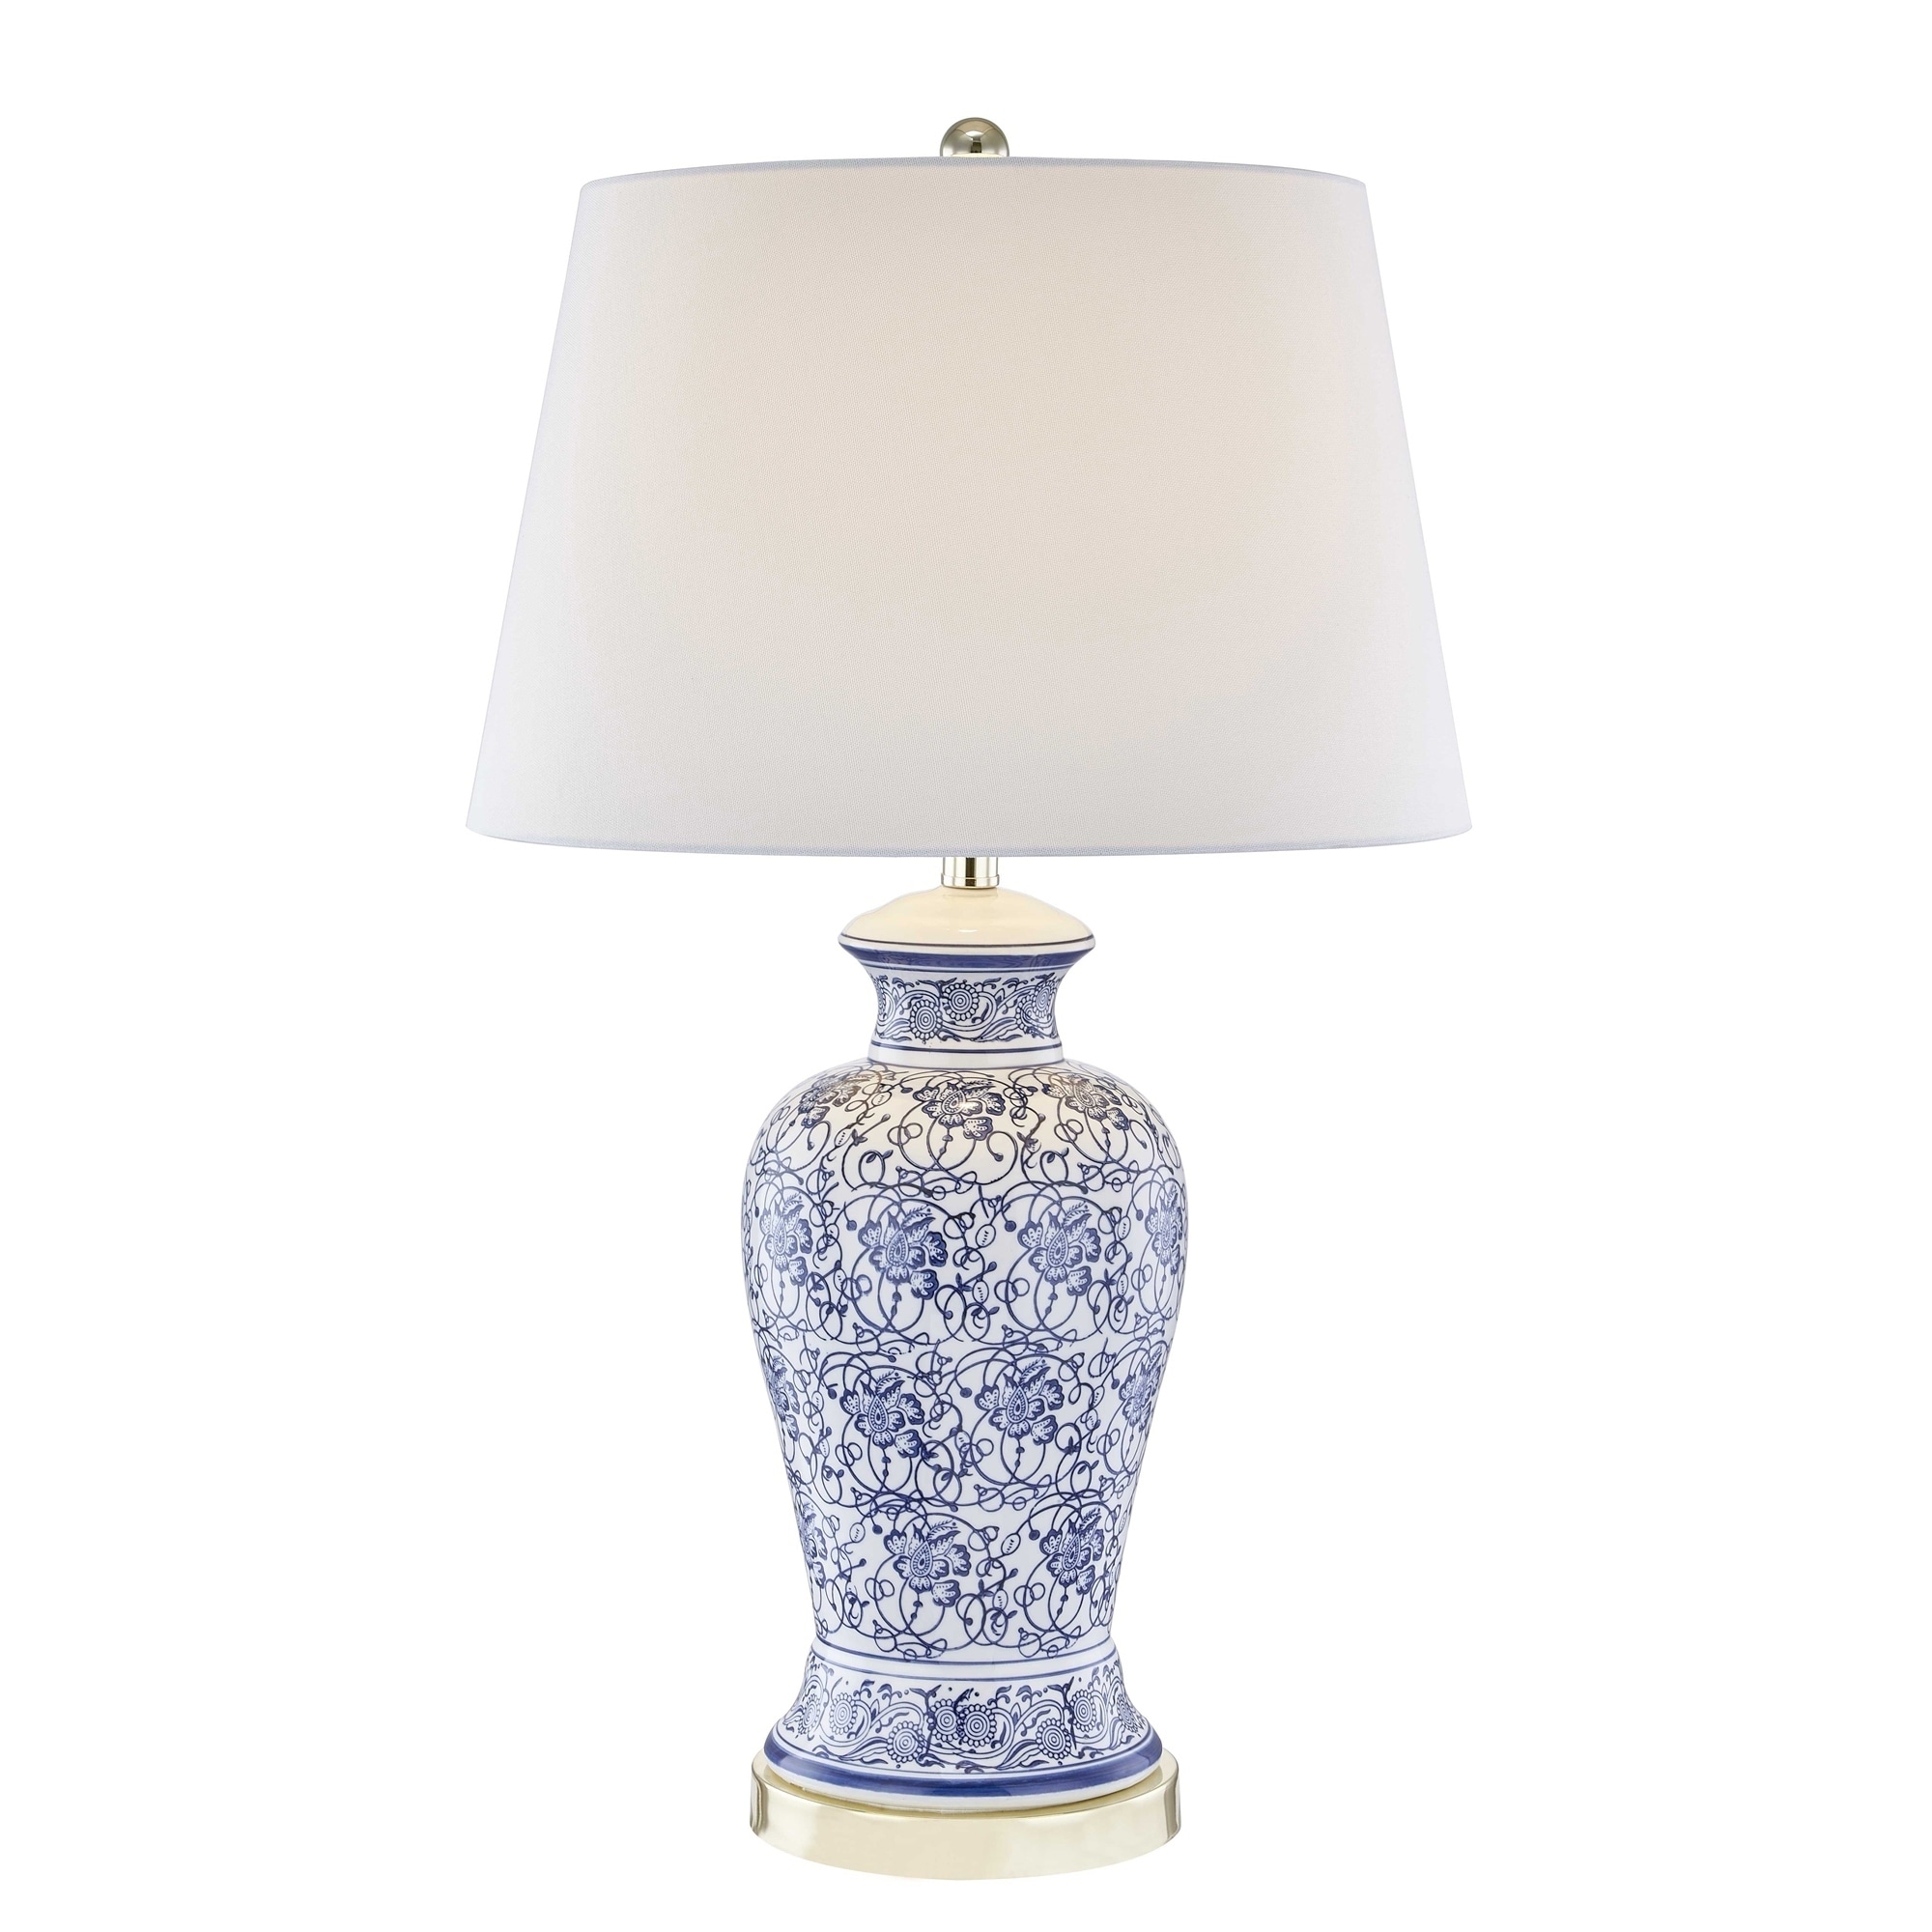 Ceramic Floral Table Lamps Online Shopping